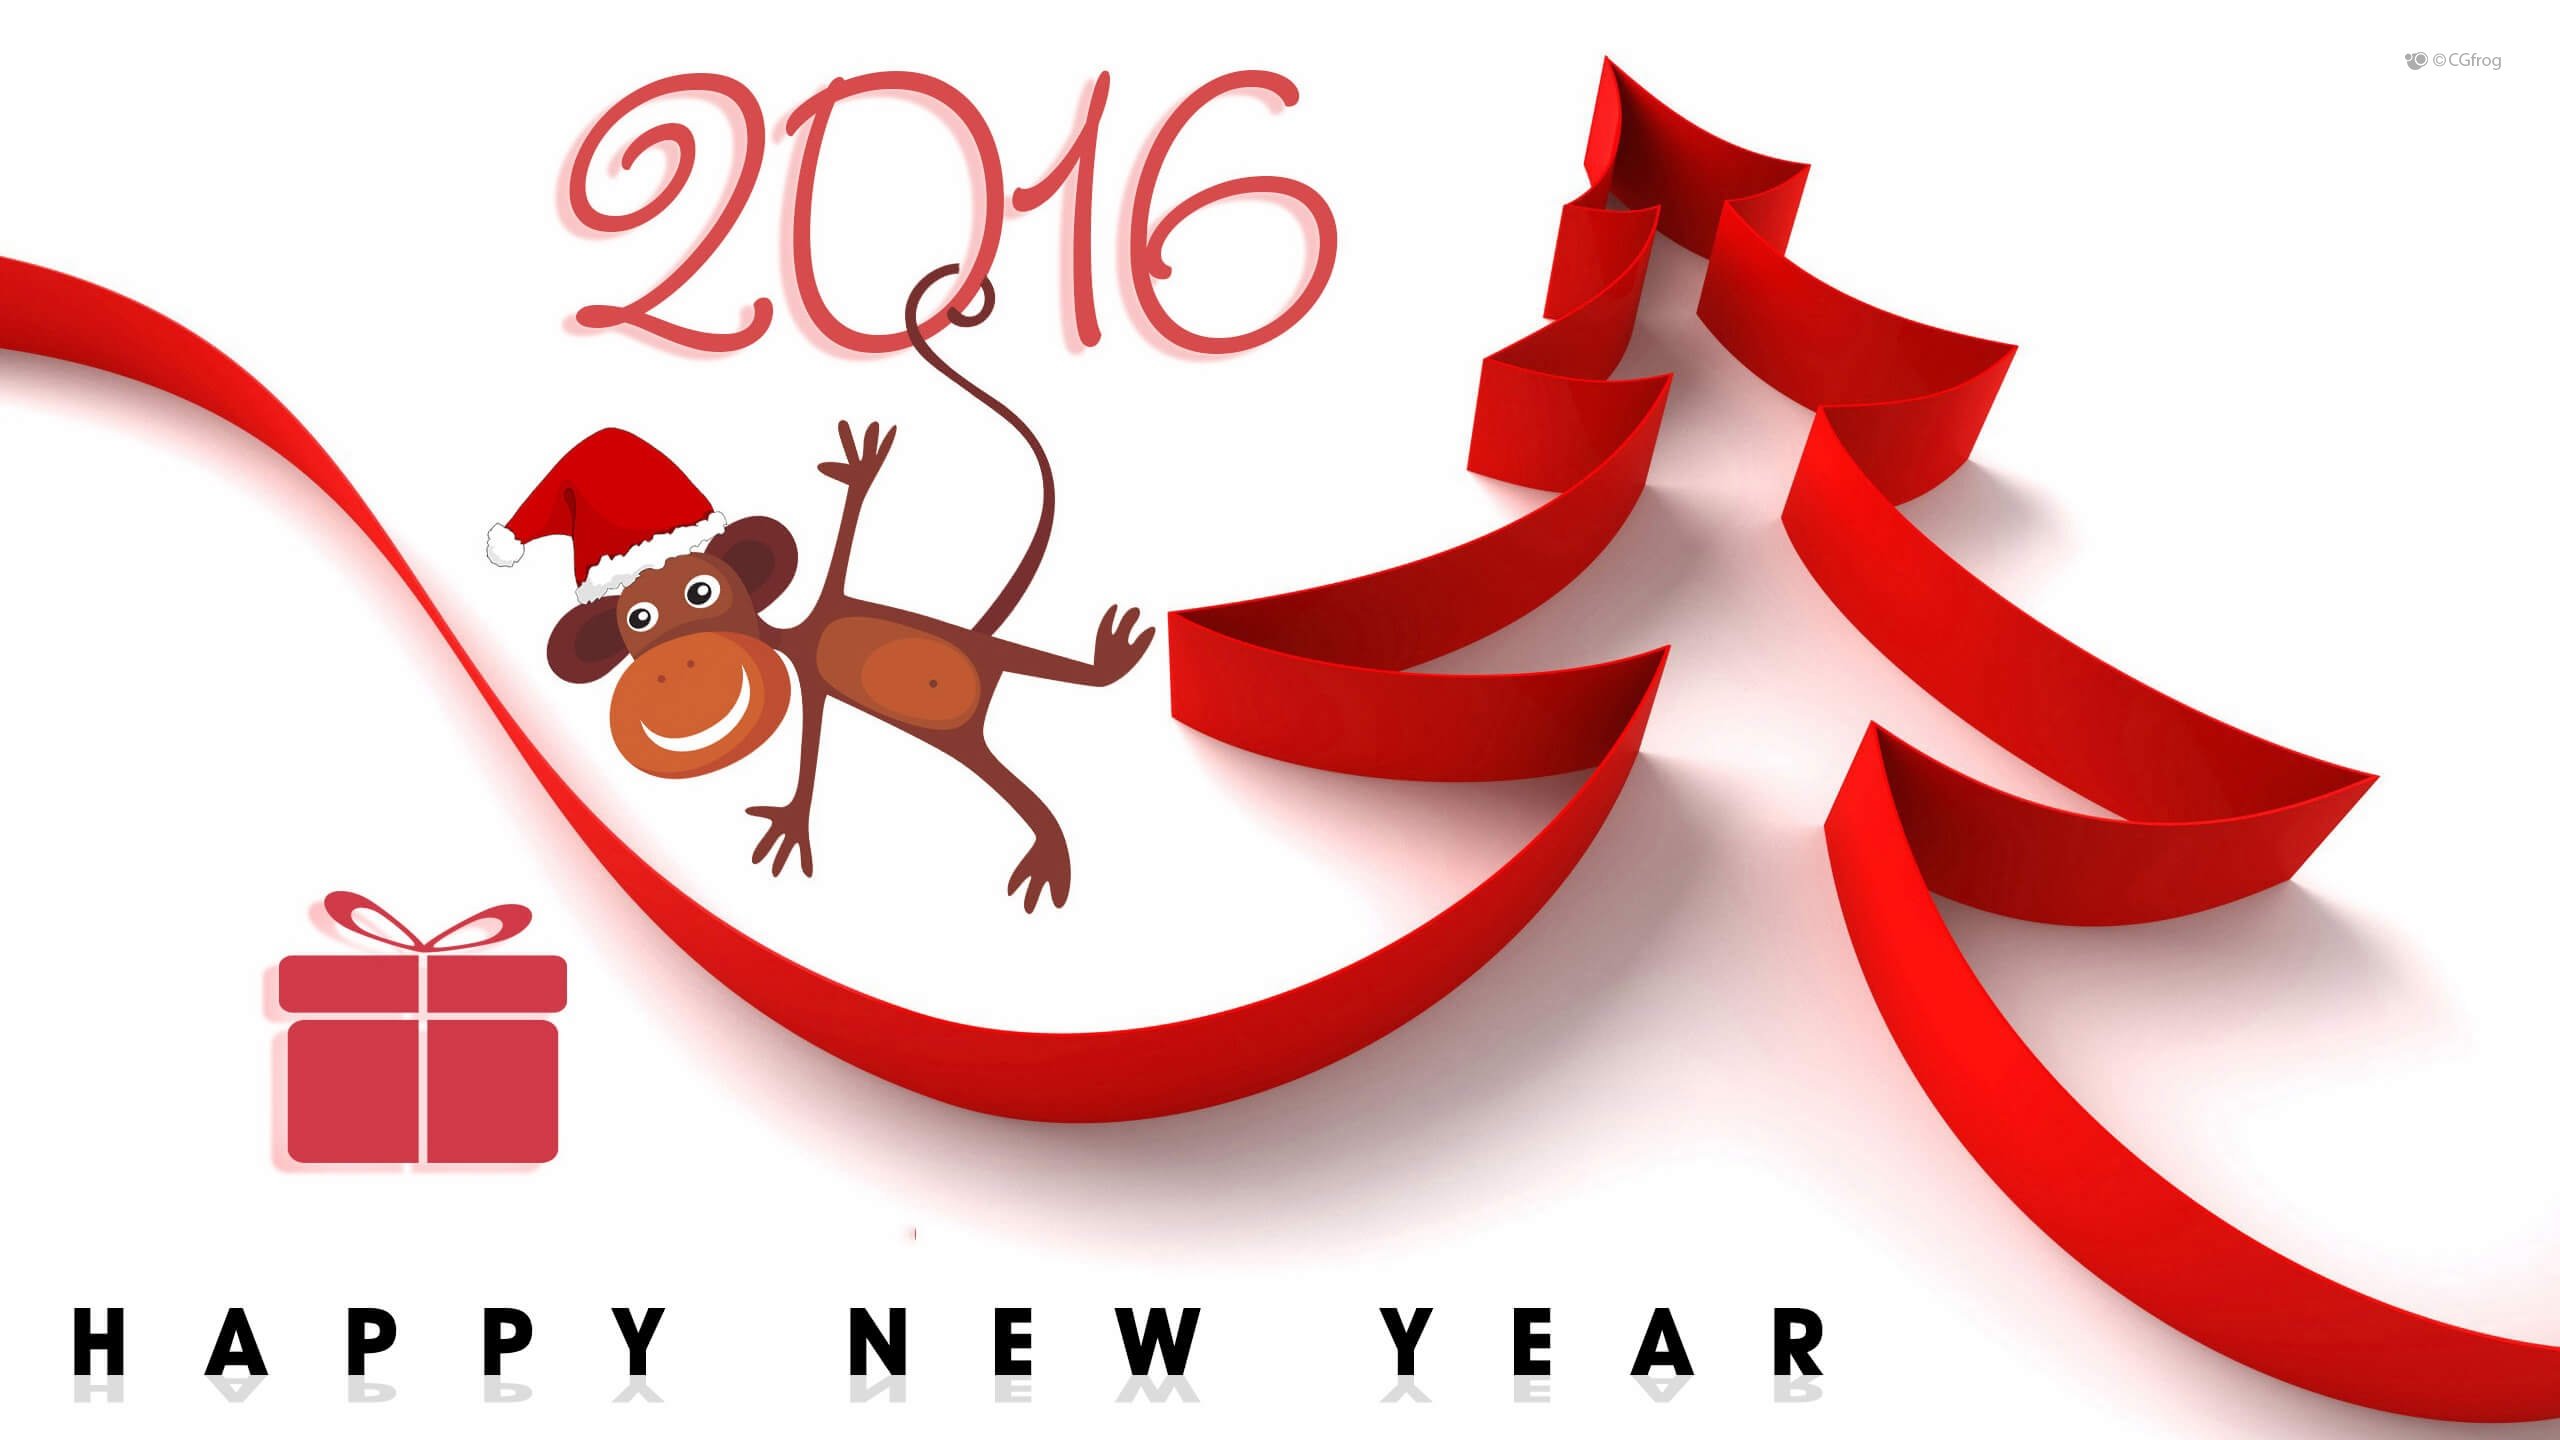 2016 Happy New Year and Christmas Typography Graphic Design Wallpaper for computer